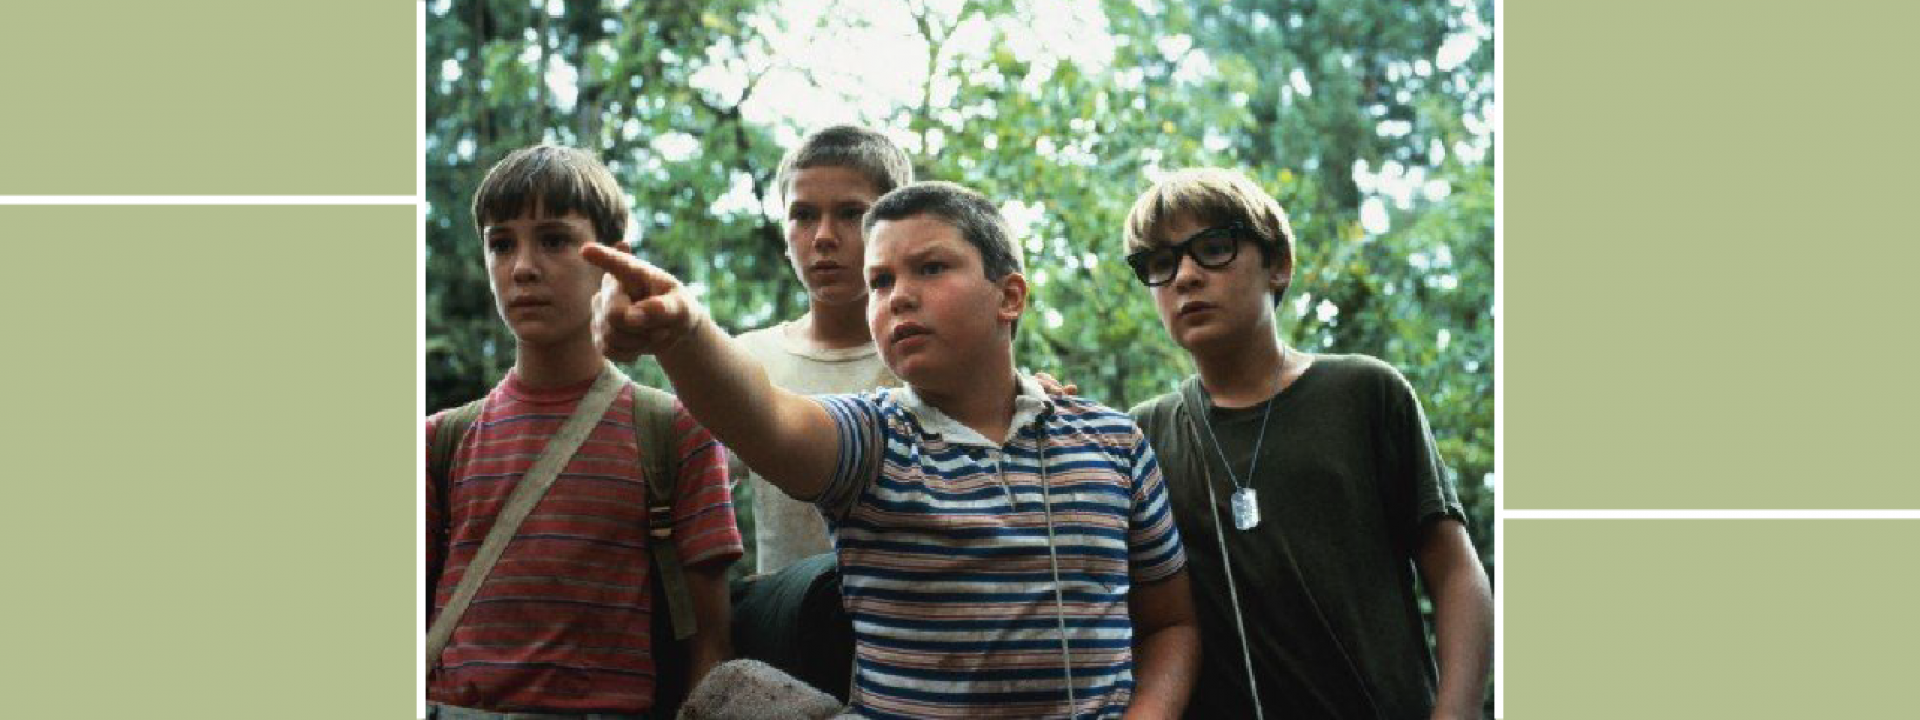 Park Your Cinema: Stand by Me (1986) - Εικόνα